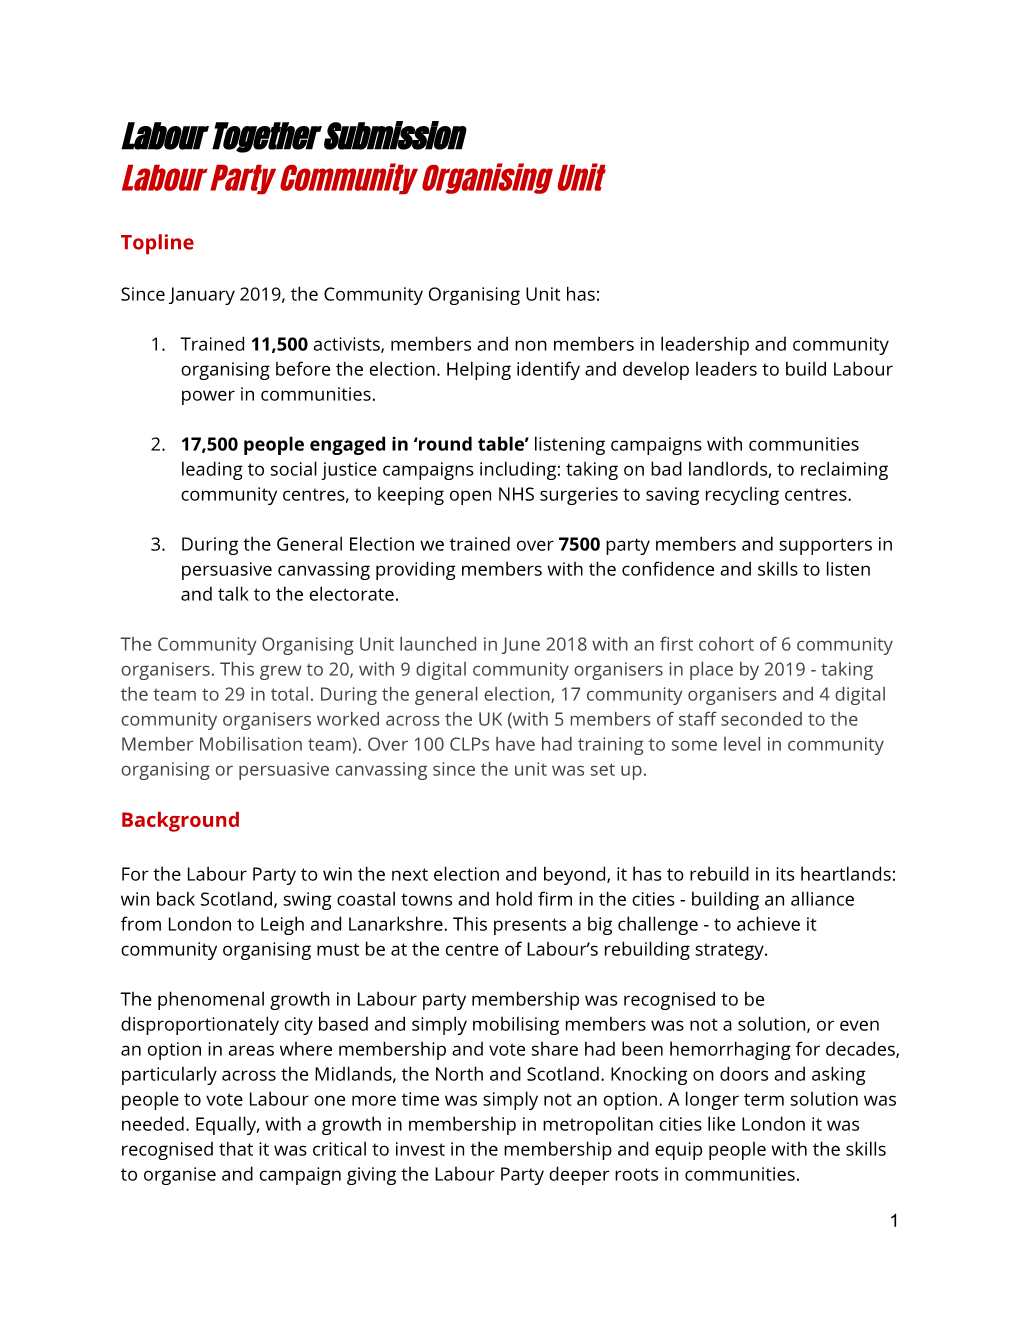 Labour Together Submission Labour Party Community Organising Unit